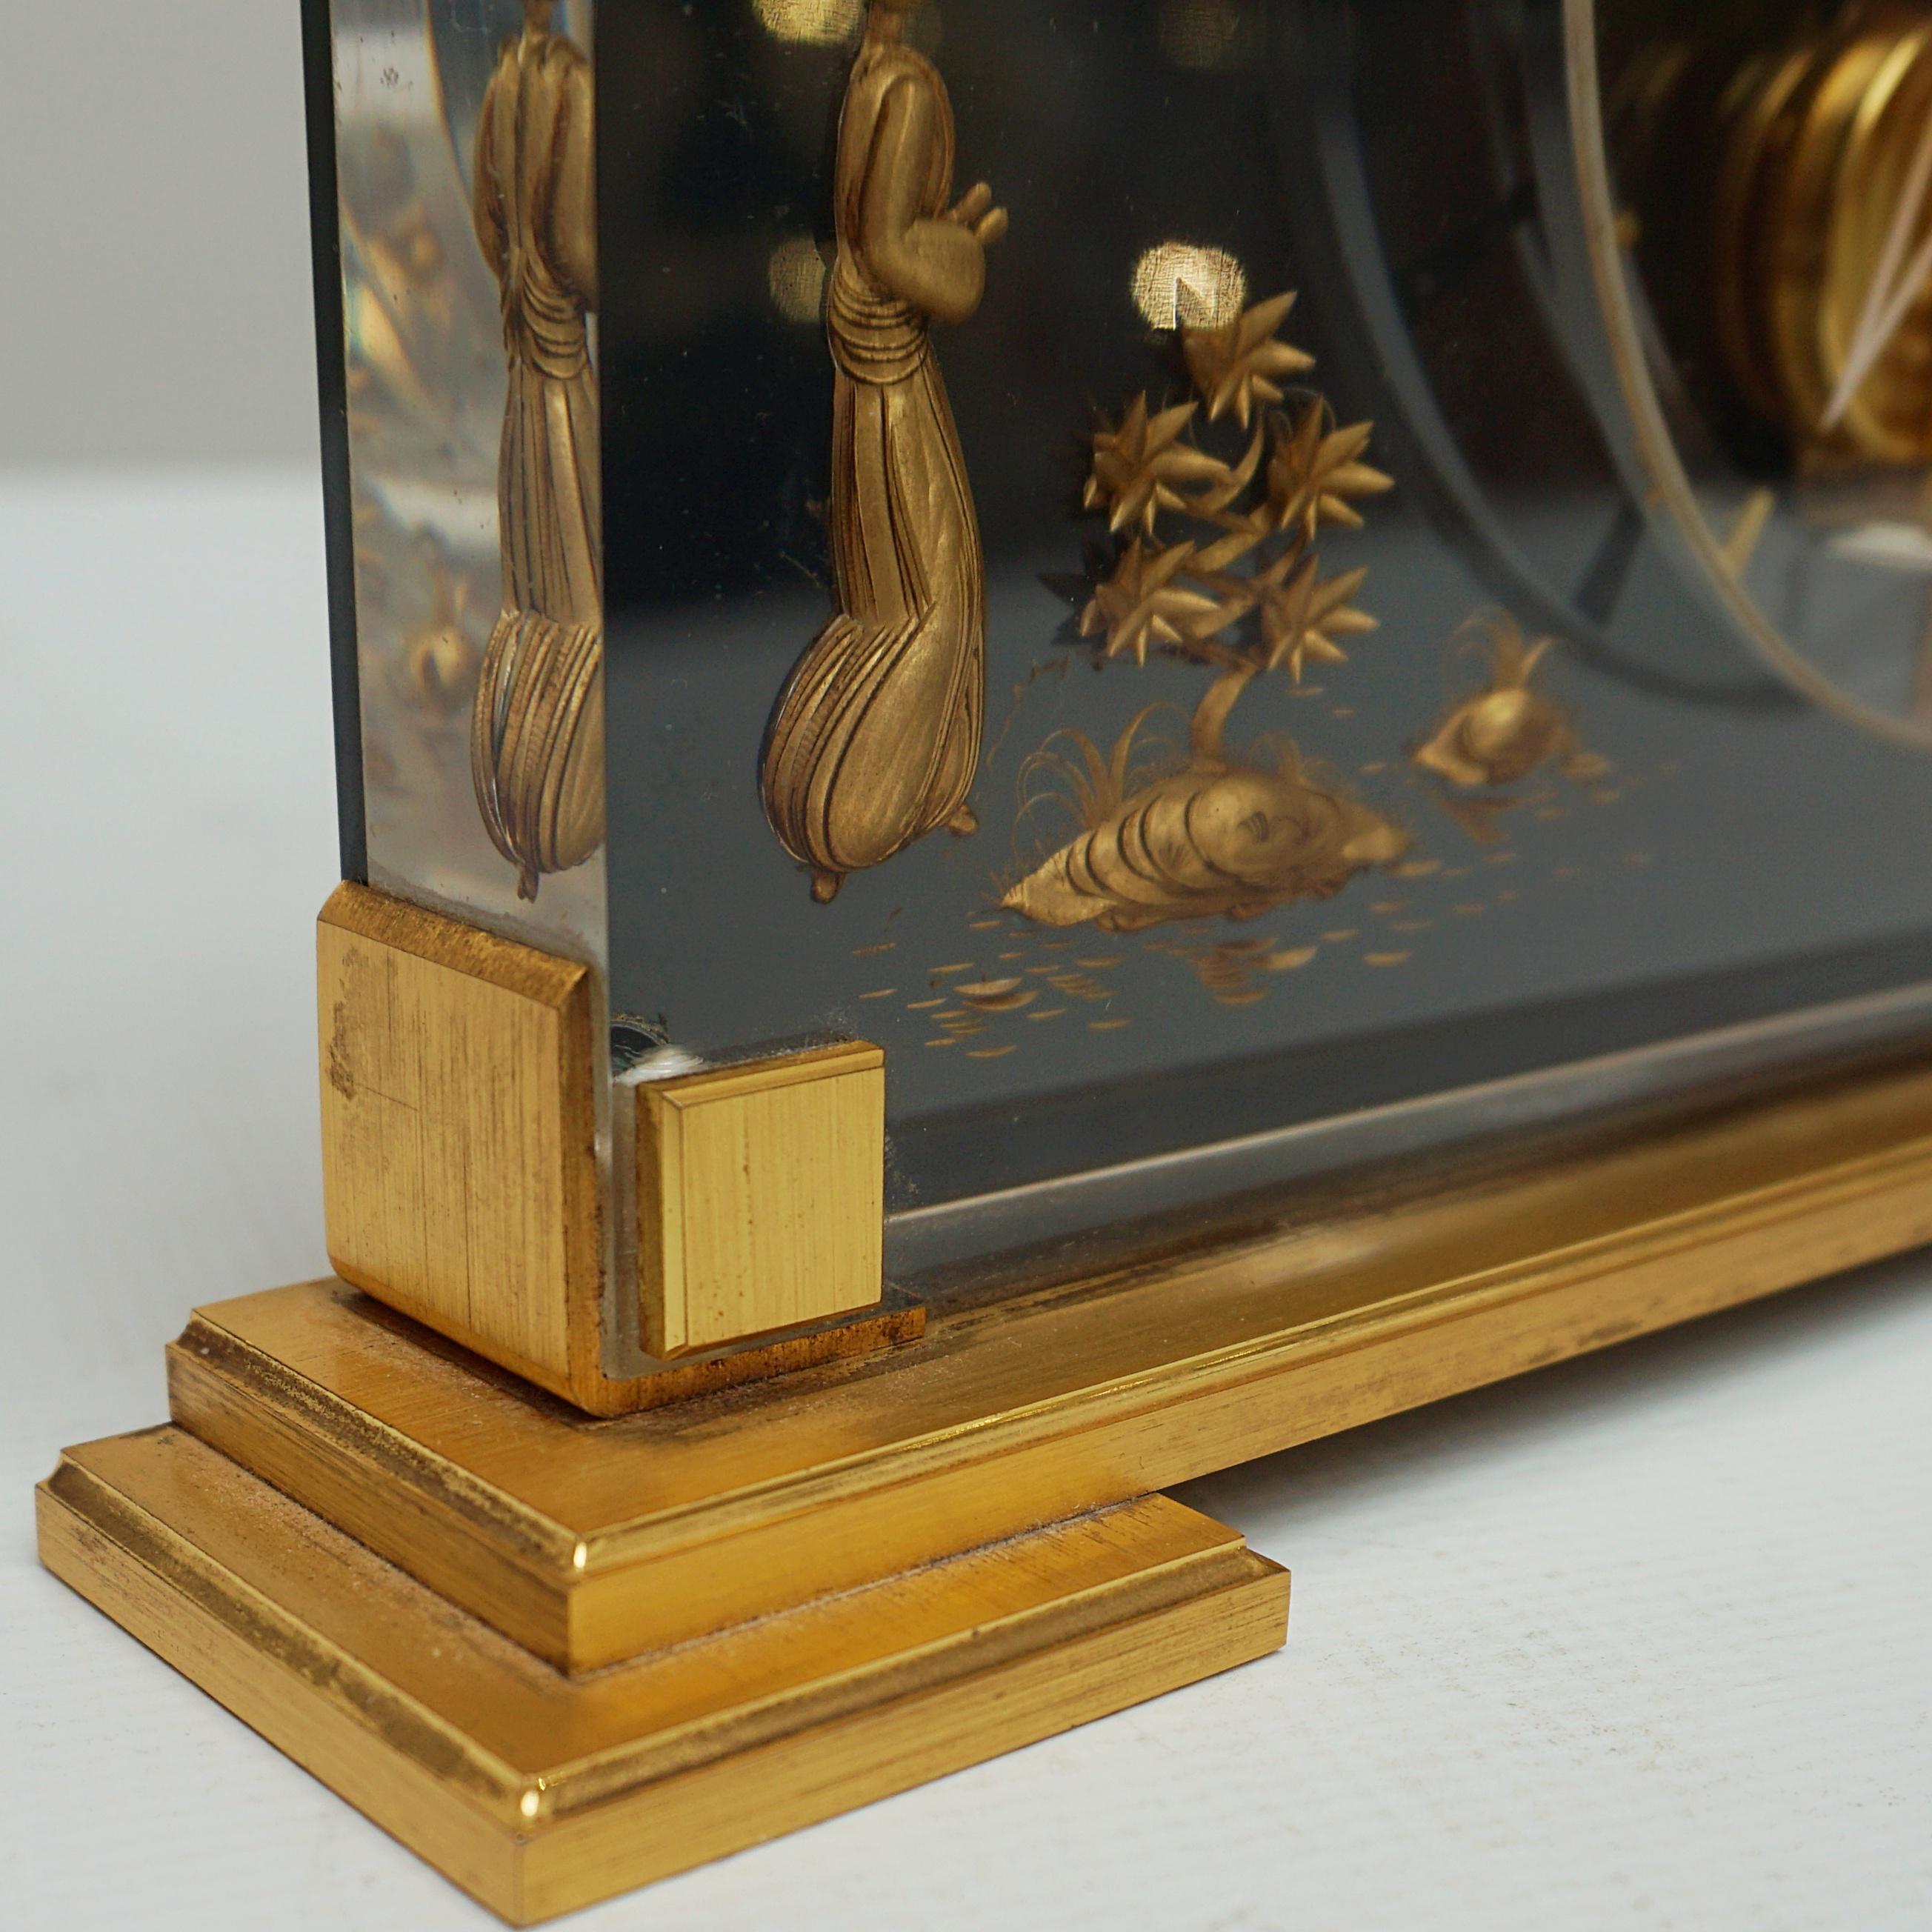 A Mid-Century Jaeger-LeCoultre mantel clock in a Lucite case with inset brass chinoiserie decoration featuring a young girl amongst the lily pads with an overhanging branch above . Set over a gilded Brass stepped base. Eight day movement by